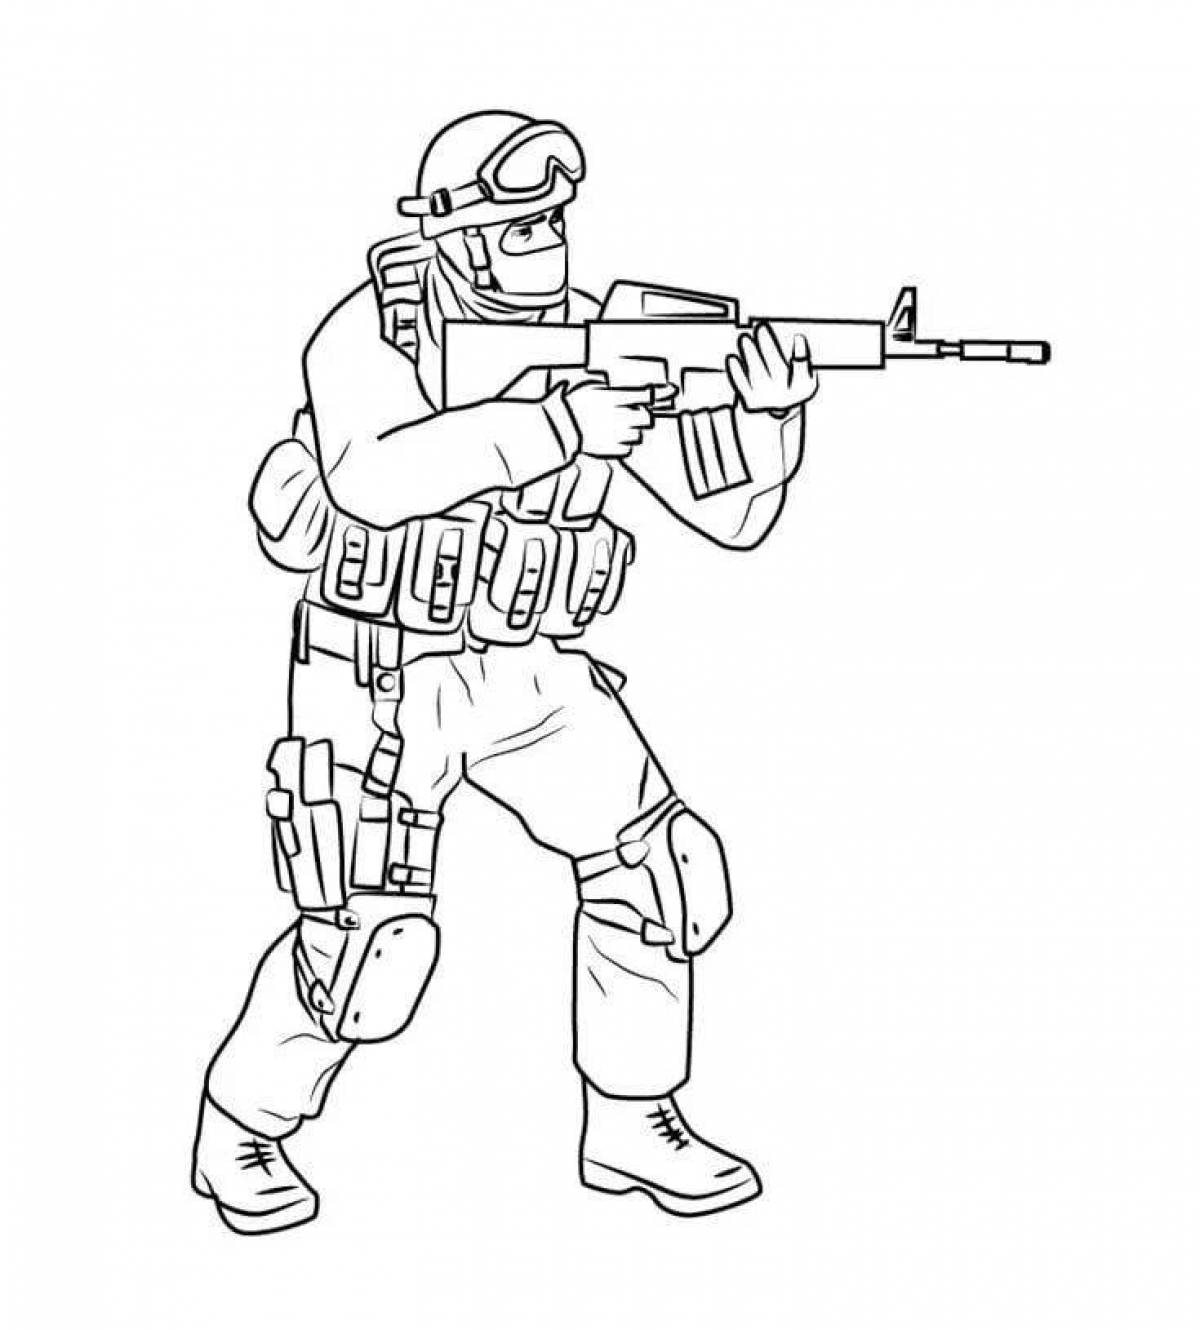 Exciting confrontation coloring page